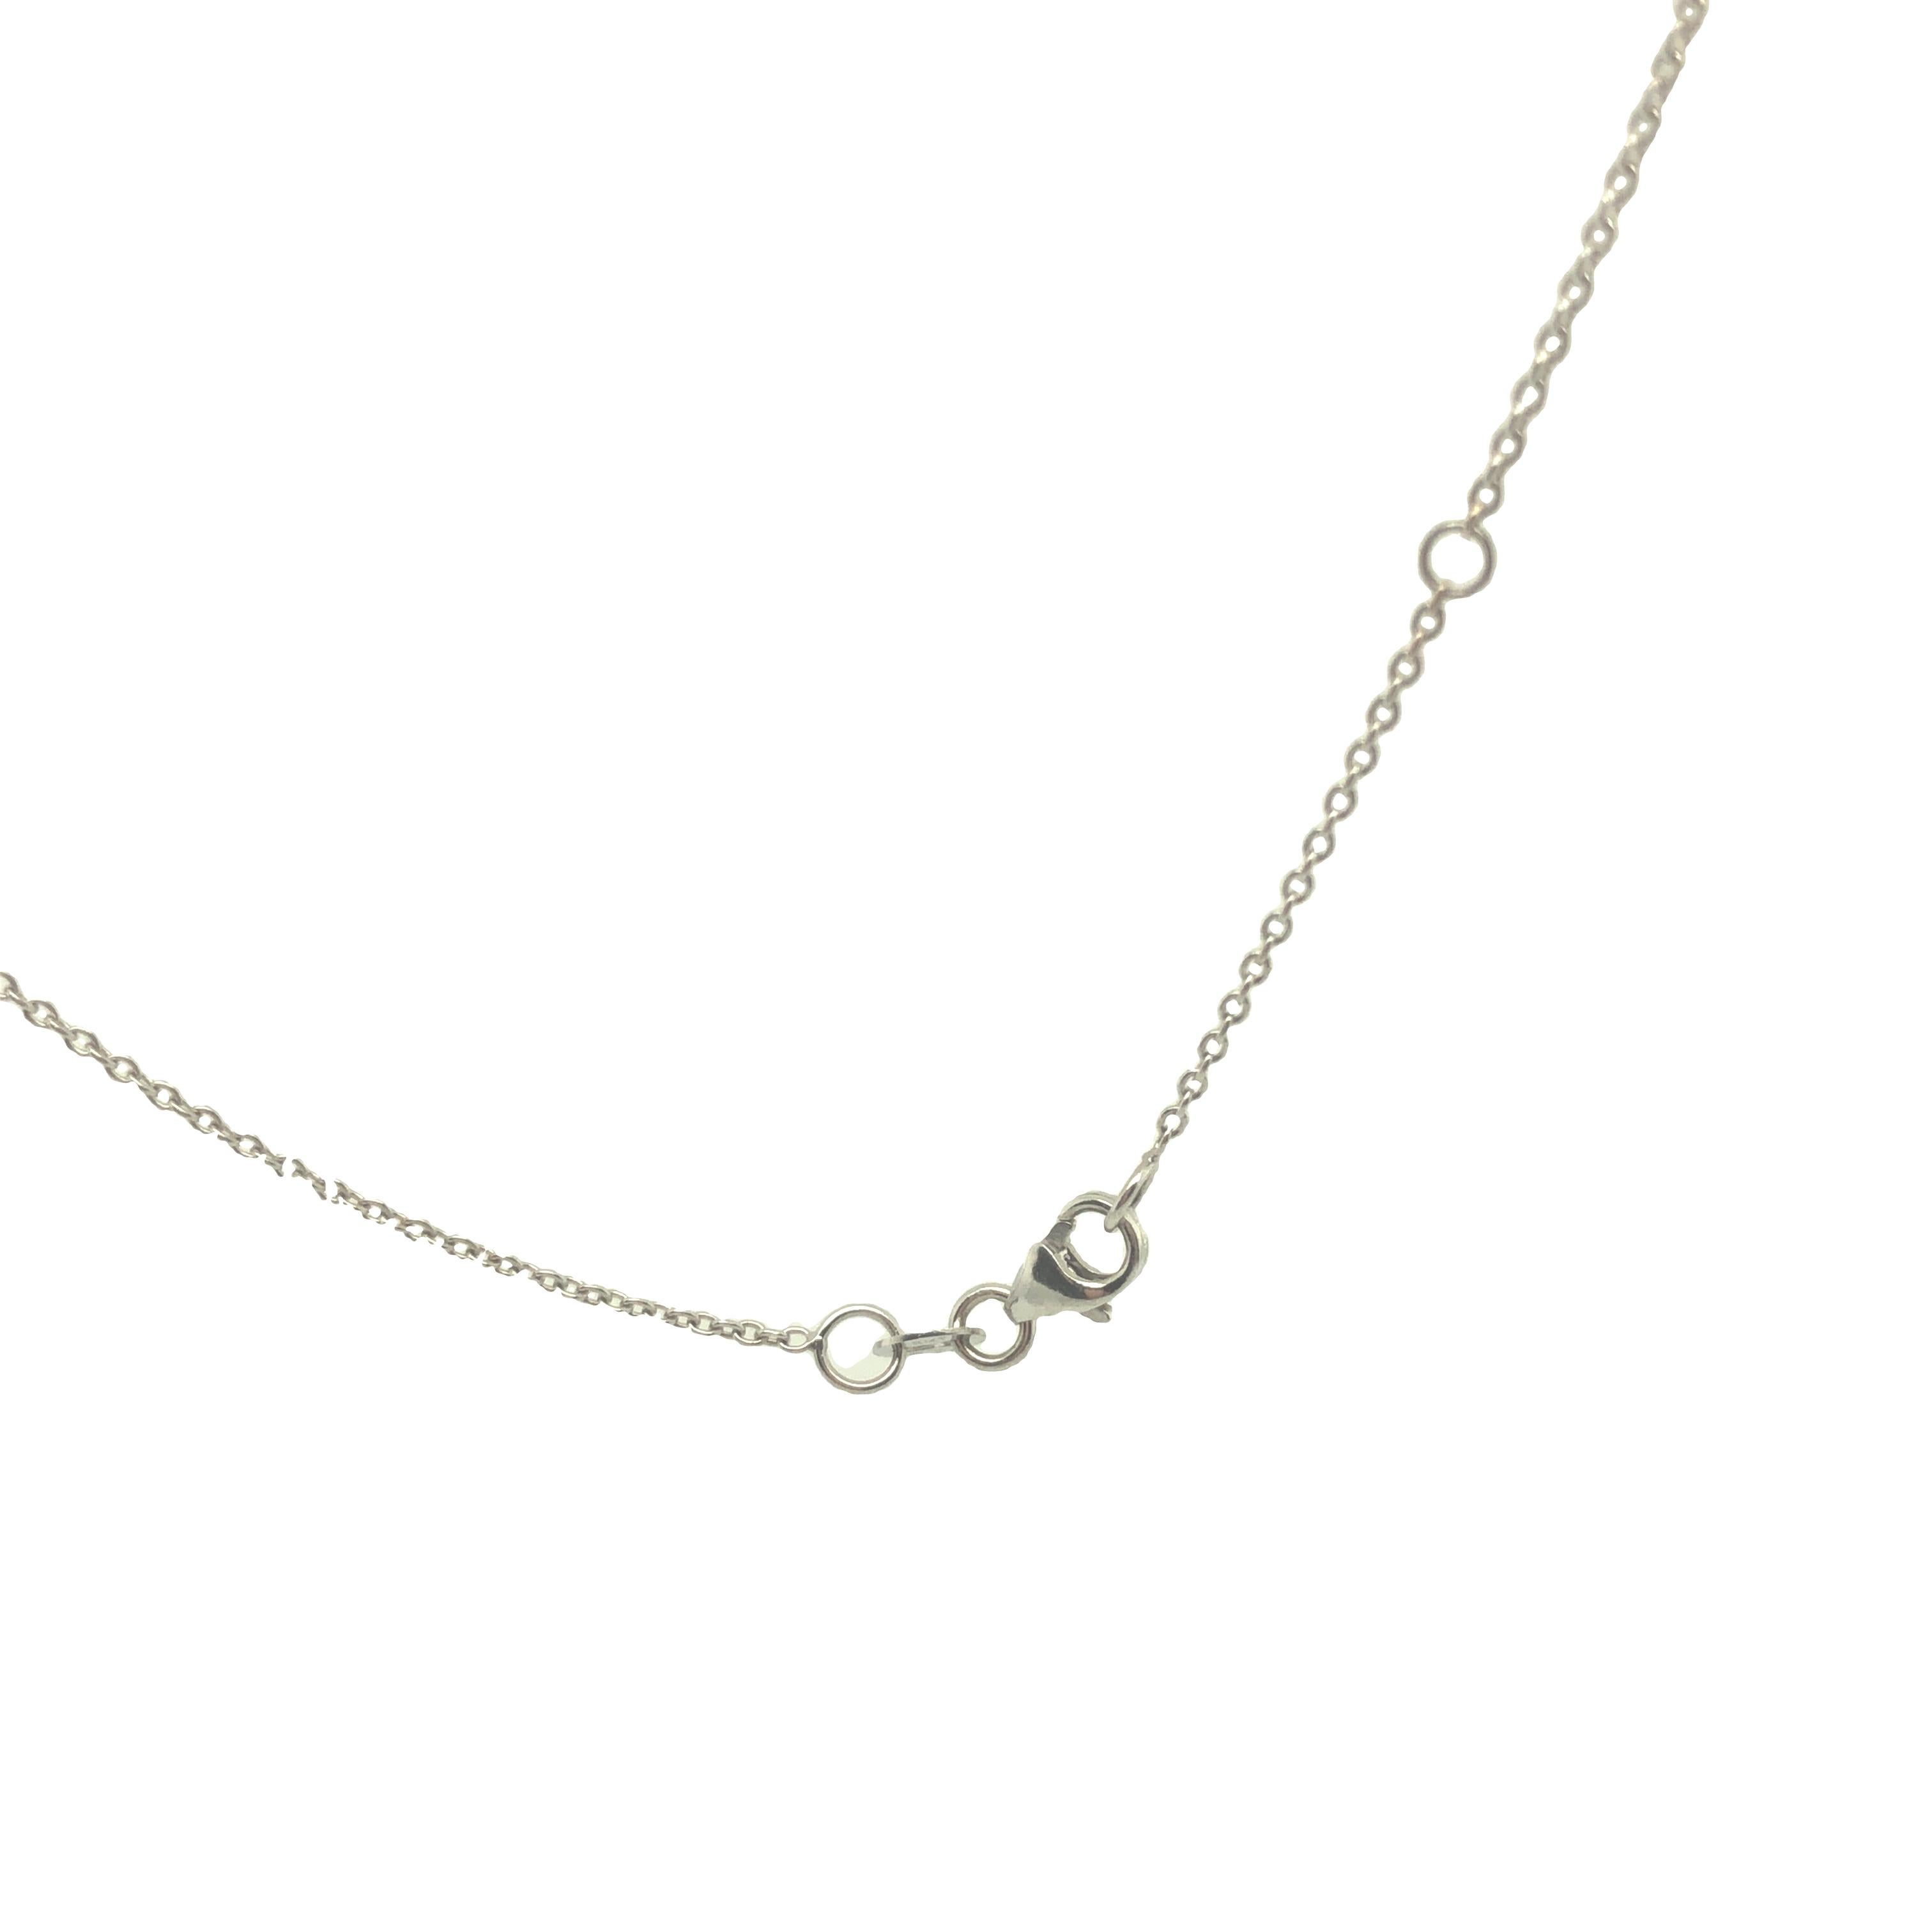 Handcrafted by our team at Gems Are Forever, Beverly Hills. This diamond by the yard necklace is perfect on its own or layer it with your favorite necklace. This classy and beautiful necklace has 6 diamond stations that are set in 18 karat white